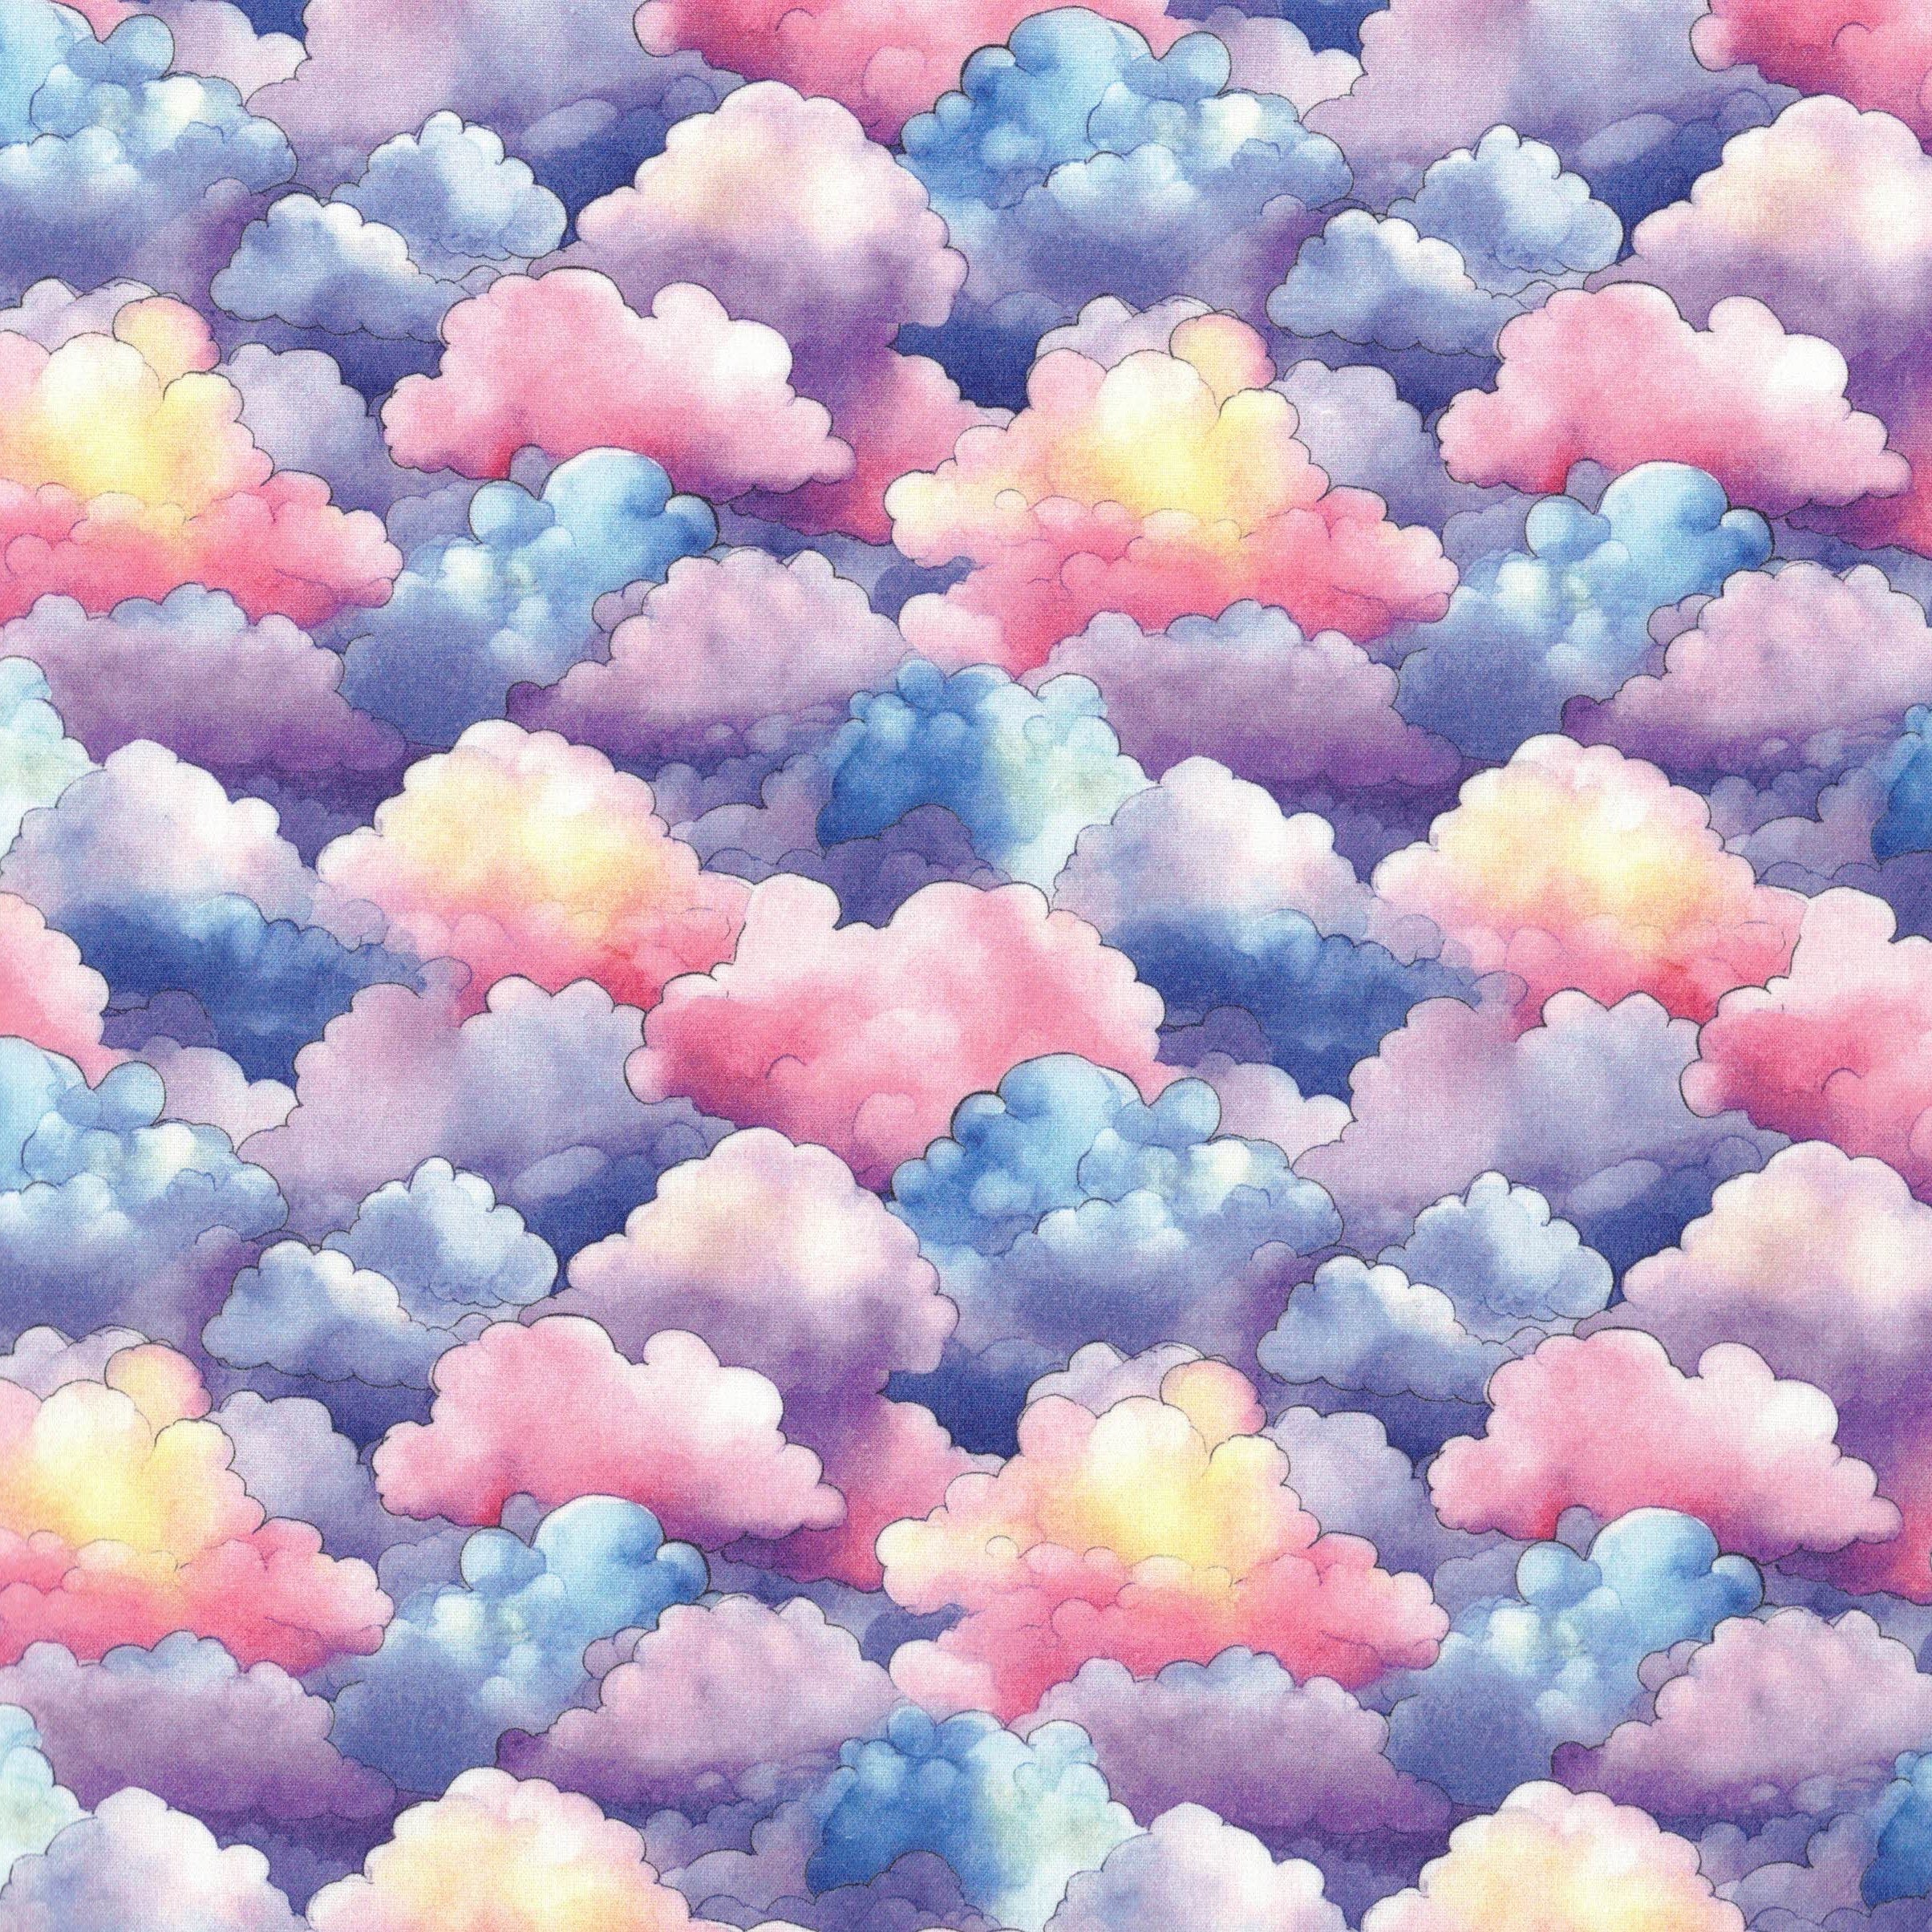 PRE-ORDER Quirky Cotton Fluffy Round Cloud Sky Nature Pink Blue (PRE-ORDER QC Watercolour Clouds)